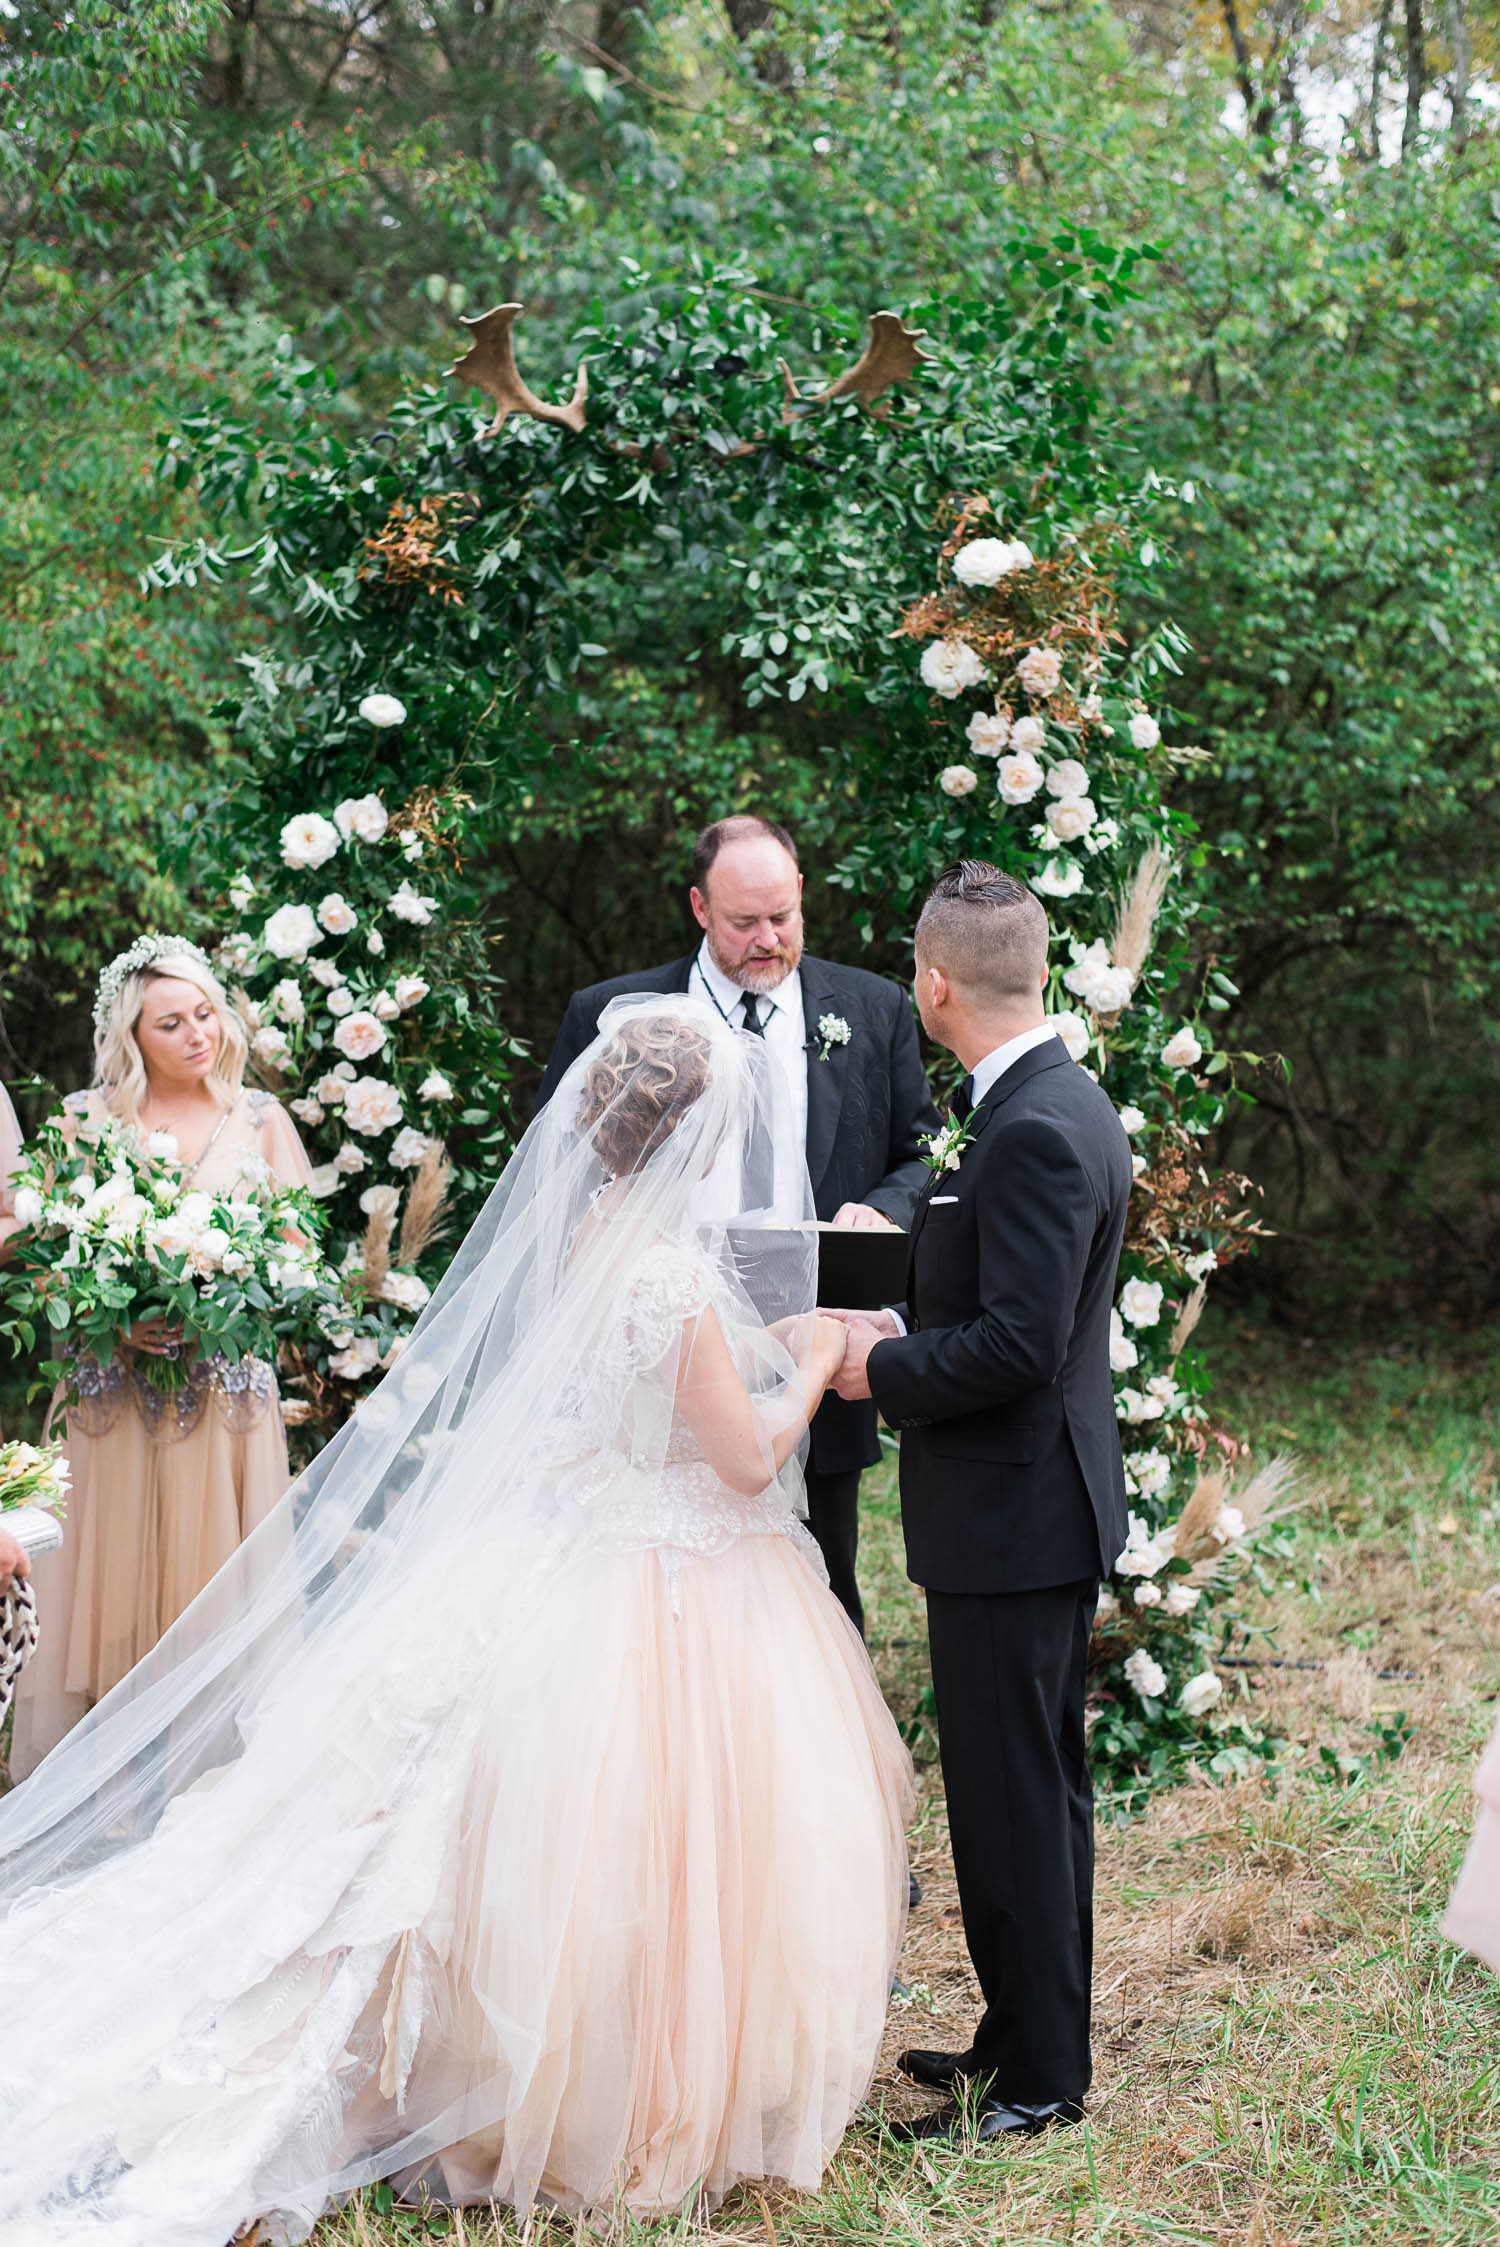 Lush wedding arch with greenery, garden roses, and antlers. Nashville Wedding Floral Design.